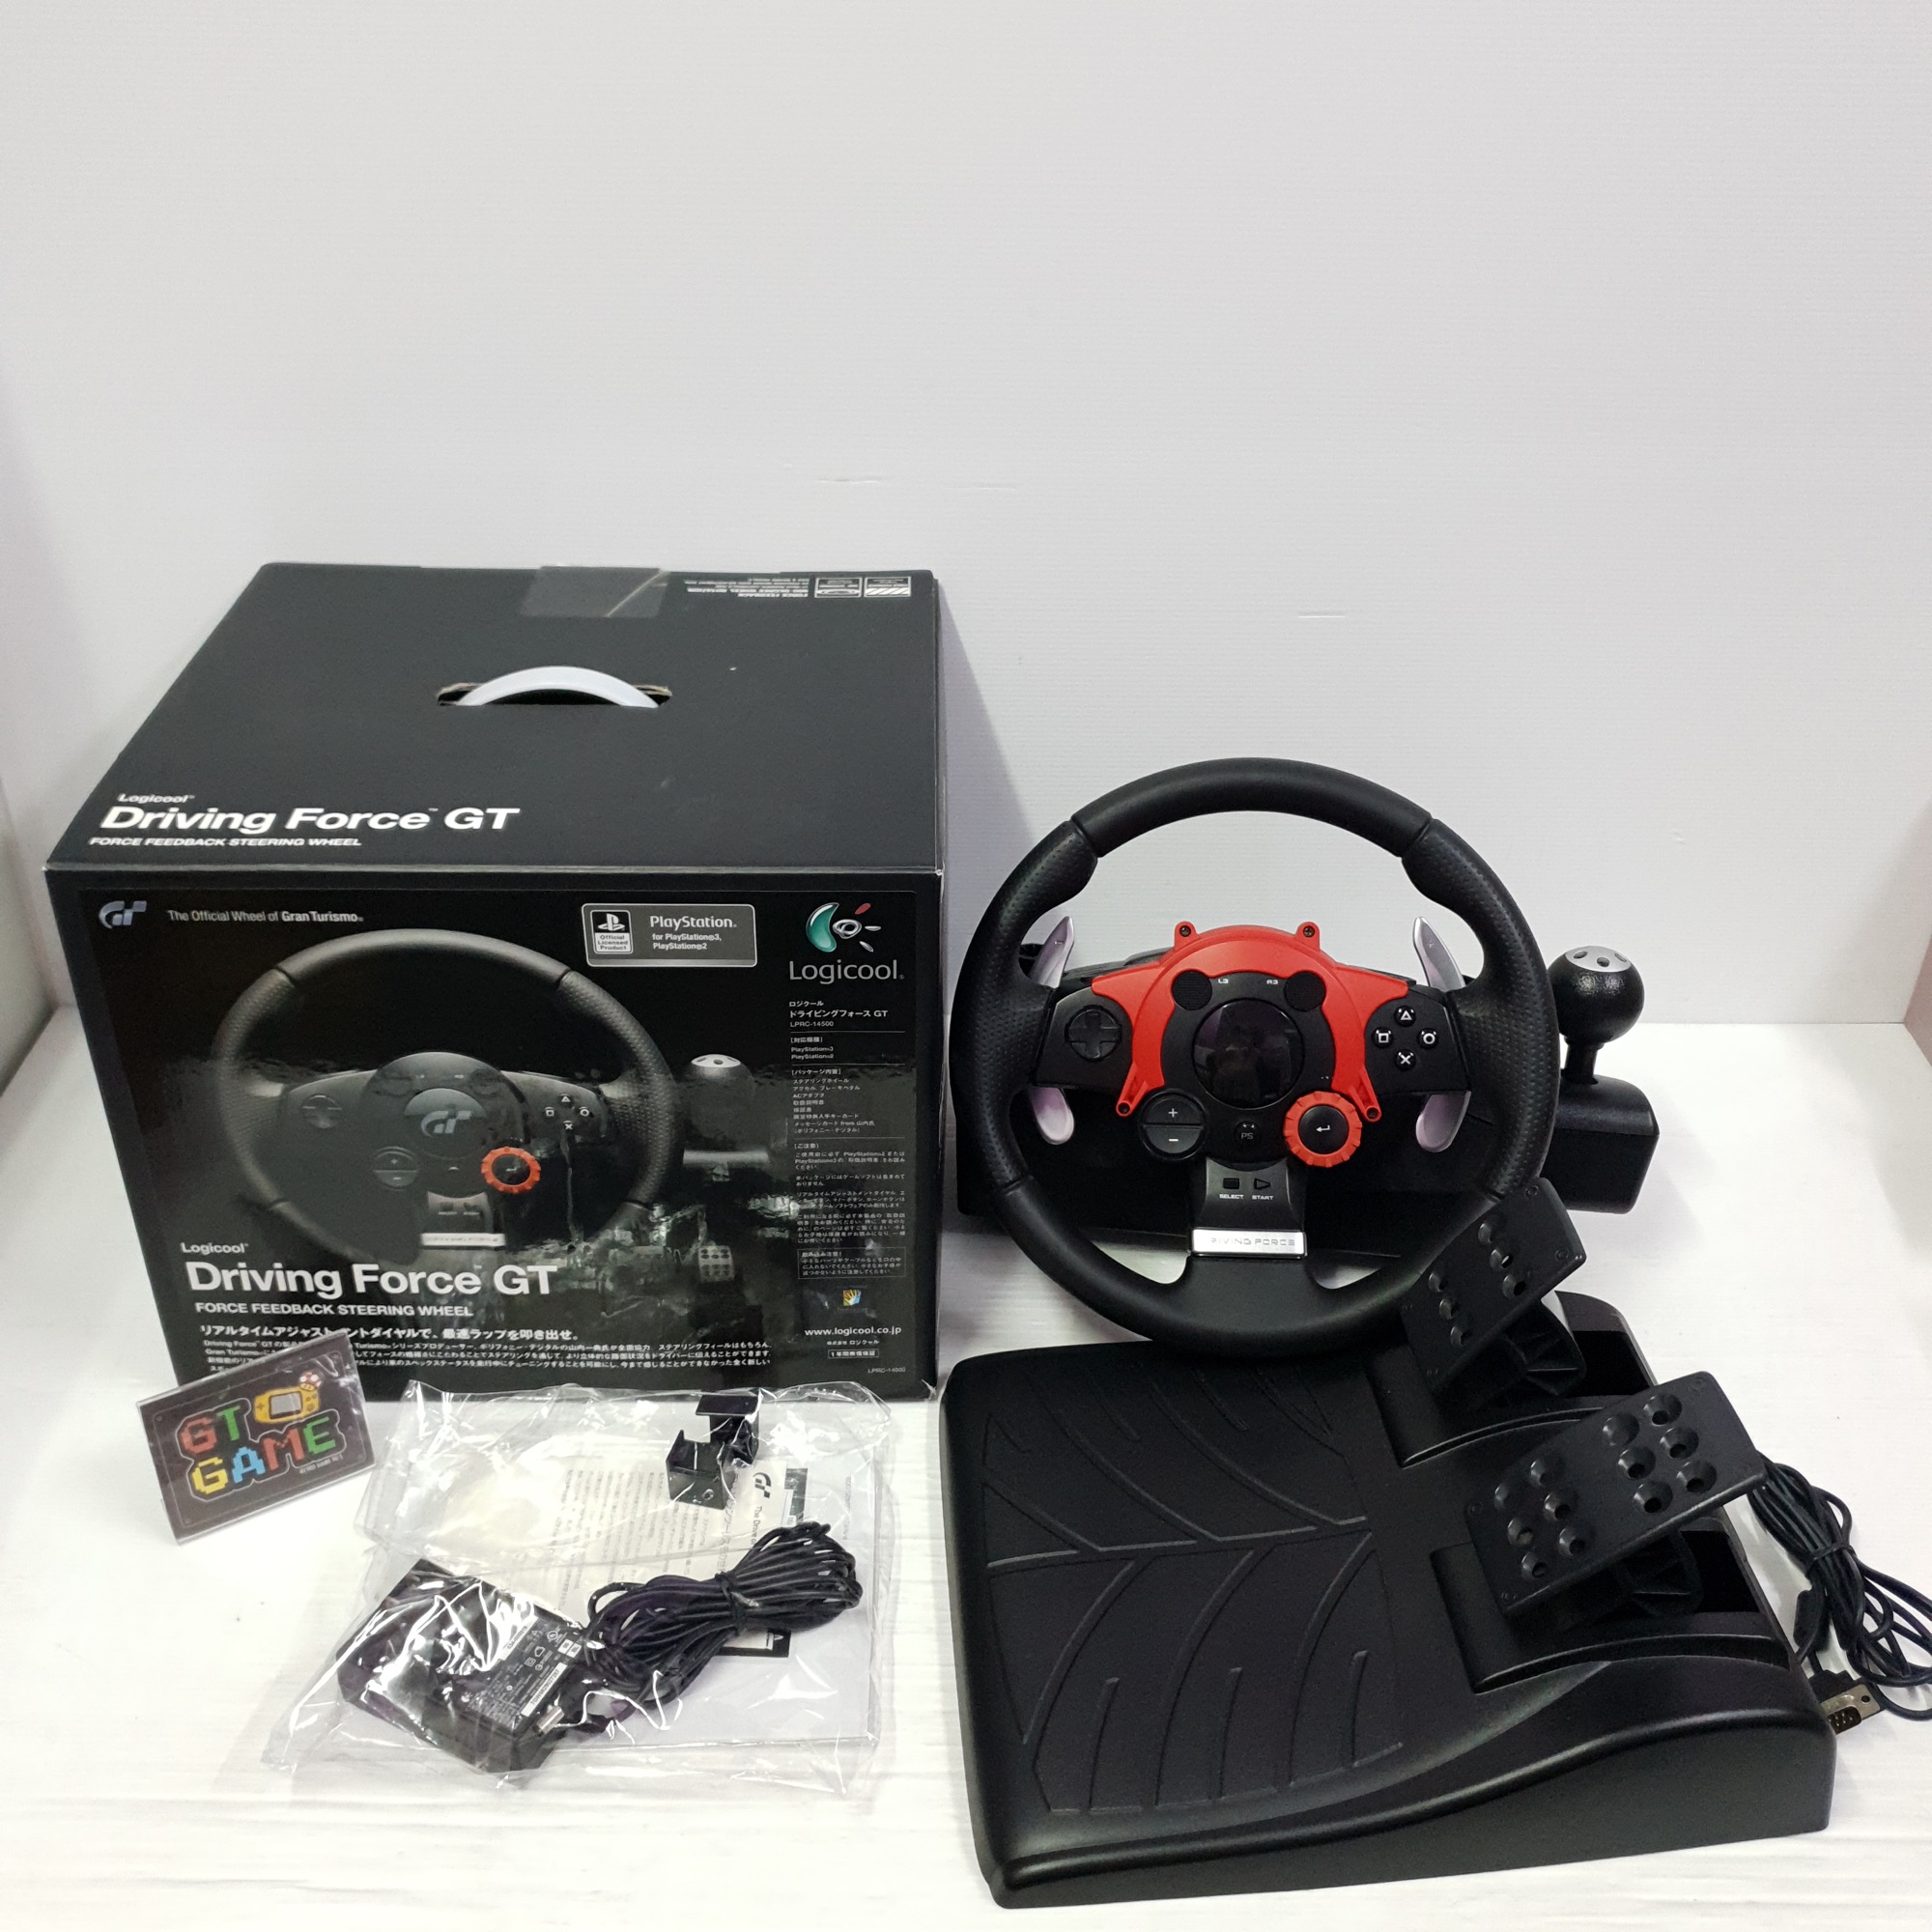 Logicool Driving force GT Limited Edition Gran turismo ( JP 